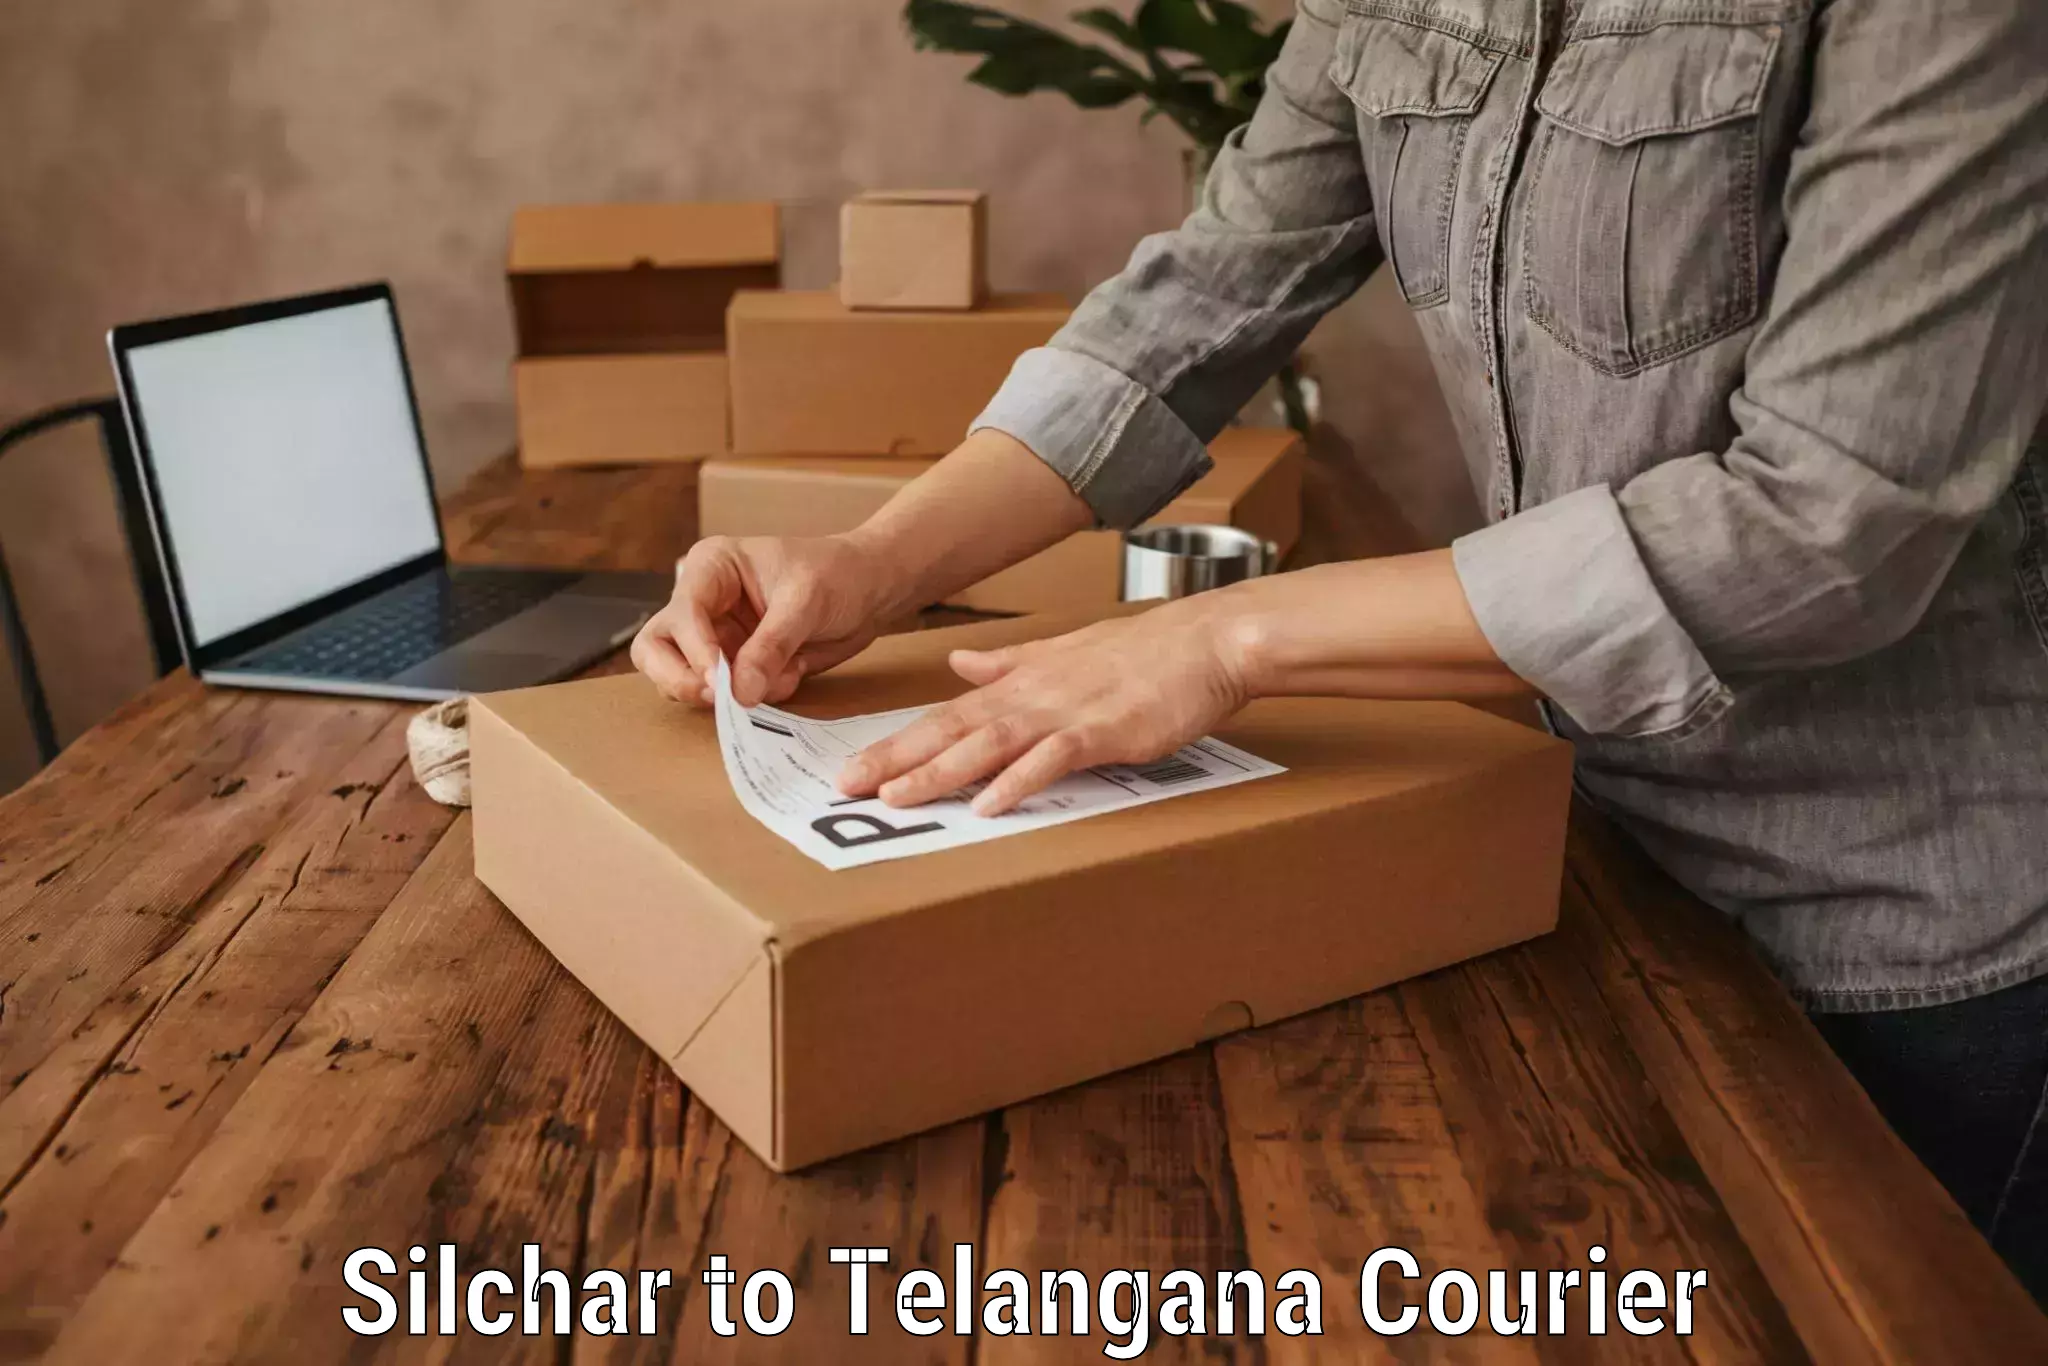 Luggage shipment specialists Silchar to Bodhan